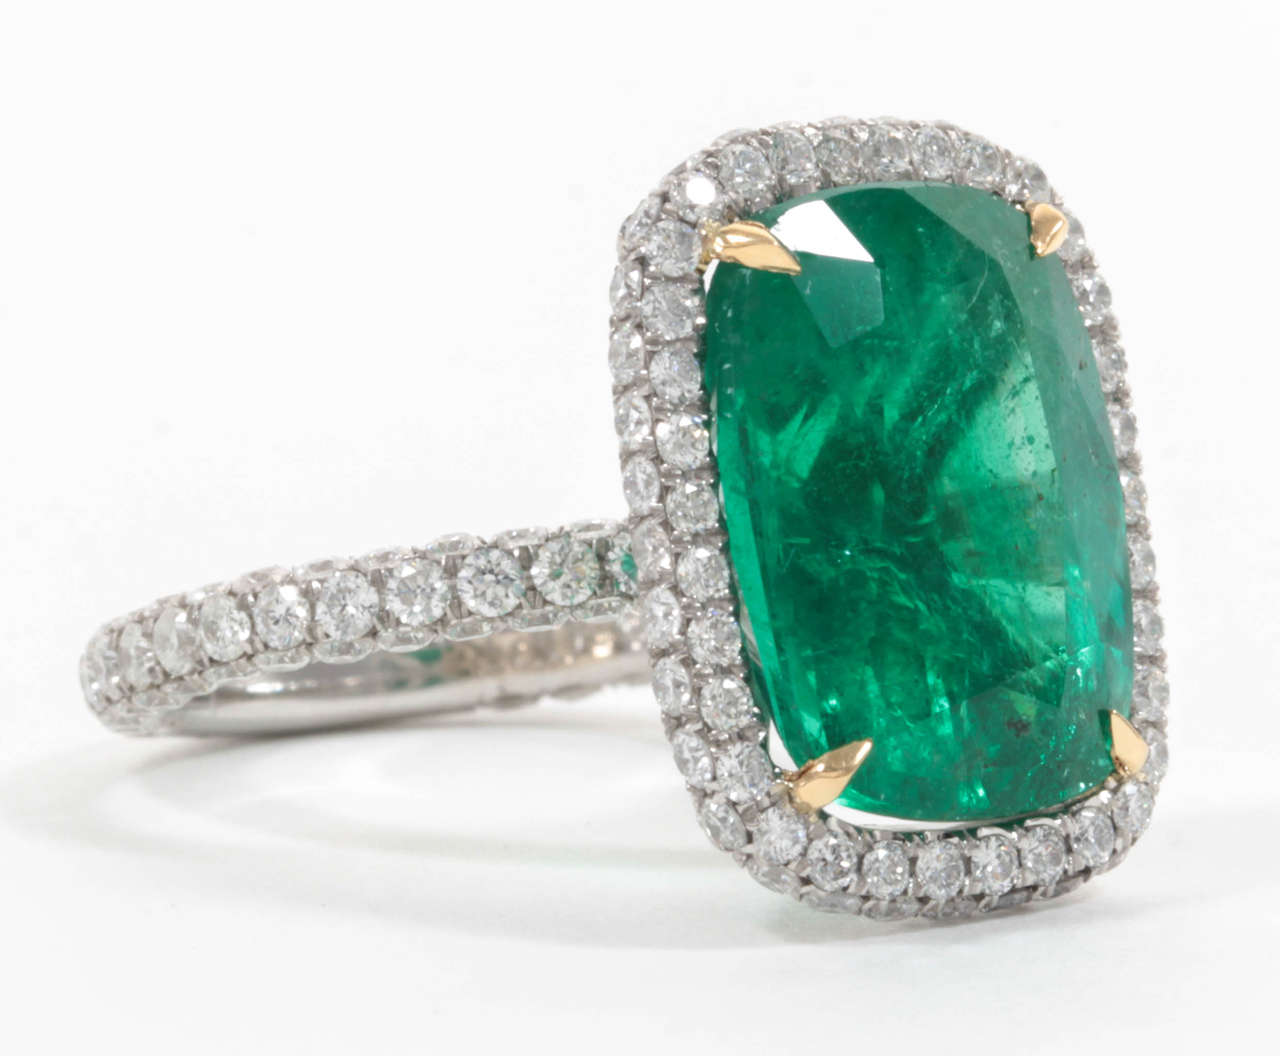 A beautiful green emerald set in a fashionable and wearable everyday (into night) setting. 

9.10 carat cushion cut 100% natural oiled Emerald.

Over 2 carats of round brilliant cut diamonds set in a custom, handmade platinum micro pave halo